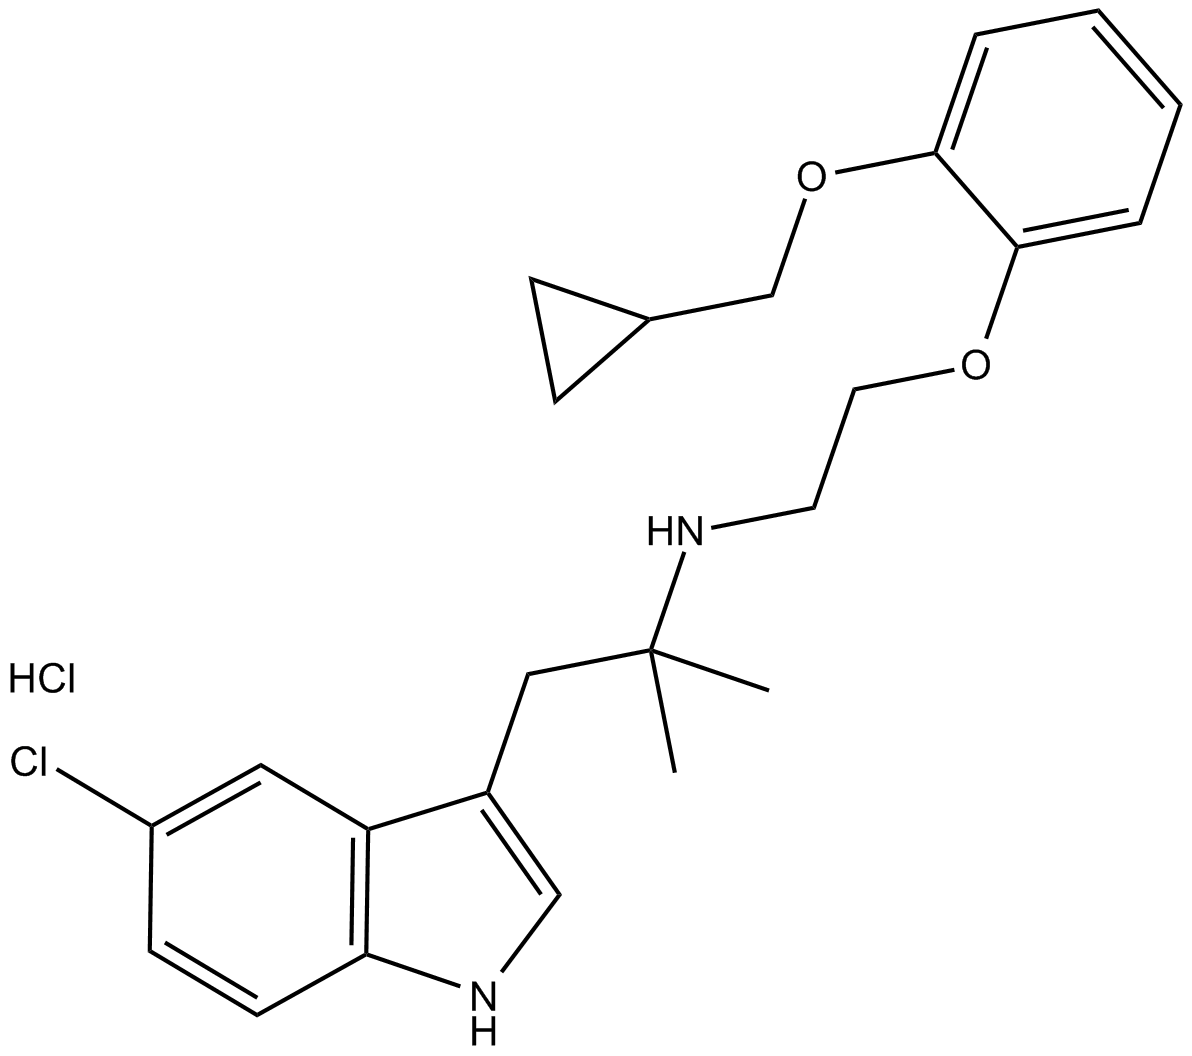 RS 17053 hydrochloride  Chemical Structure